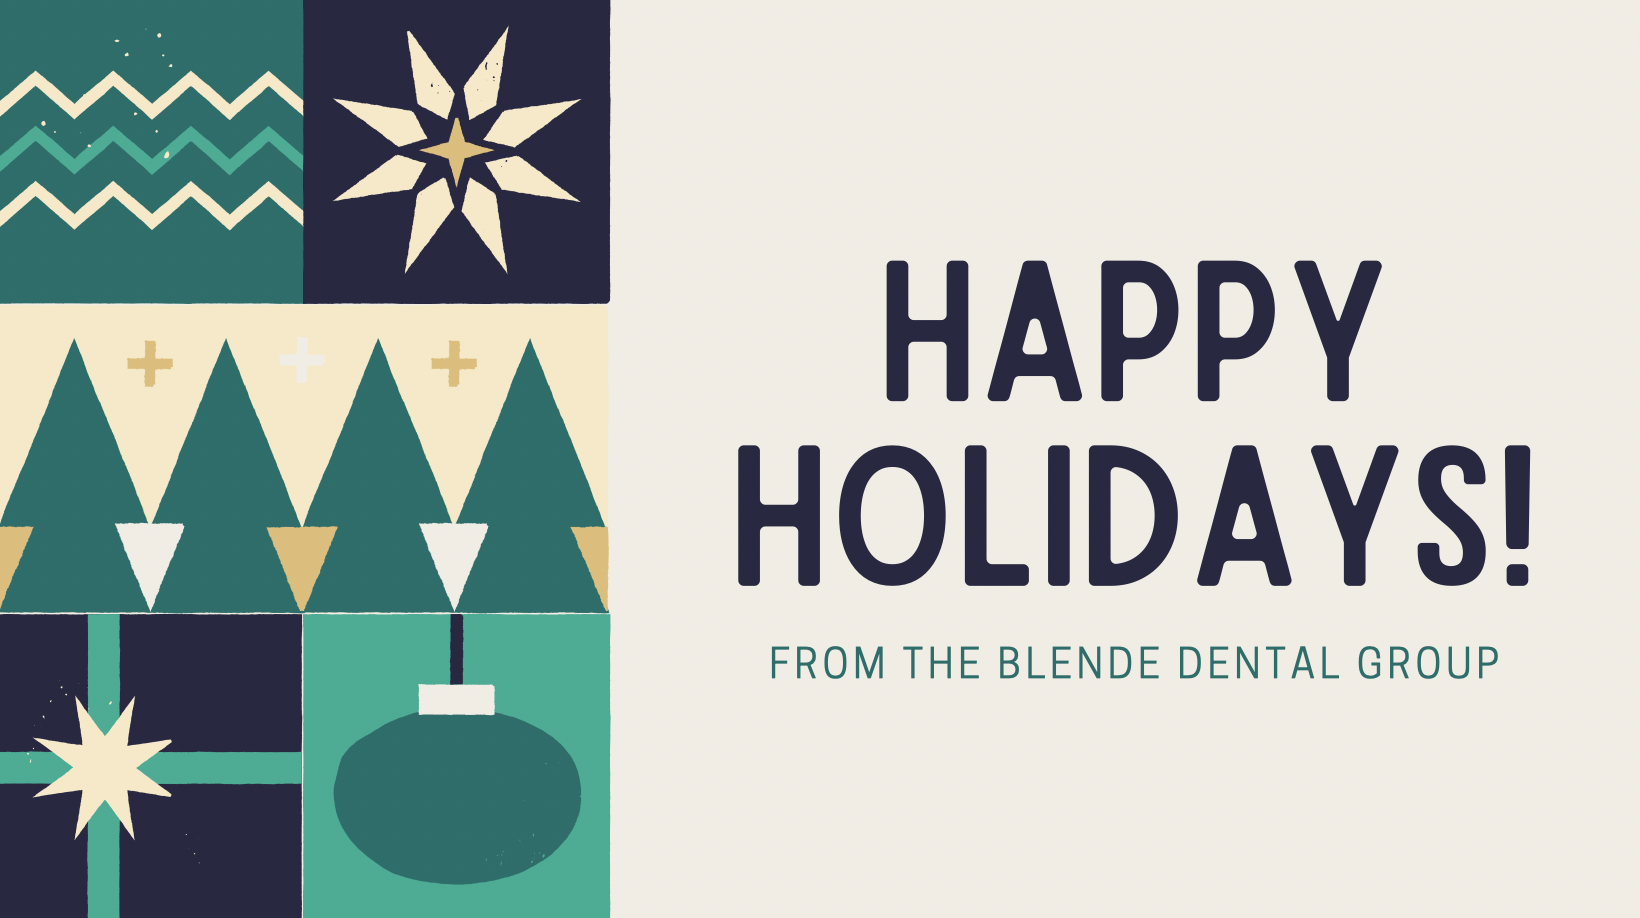 Happy Holidays from the Blende Dental Group